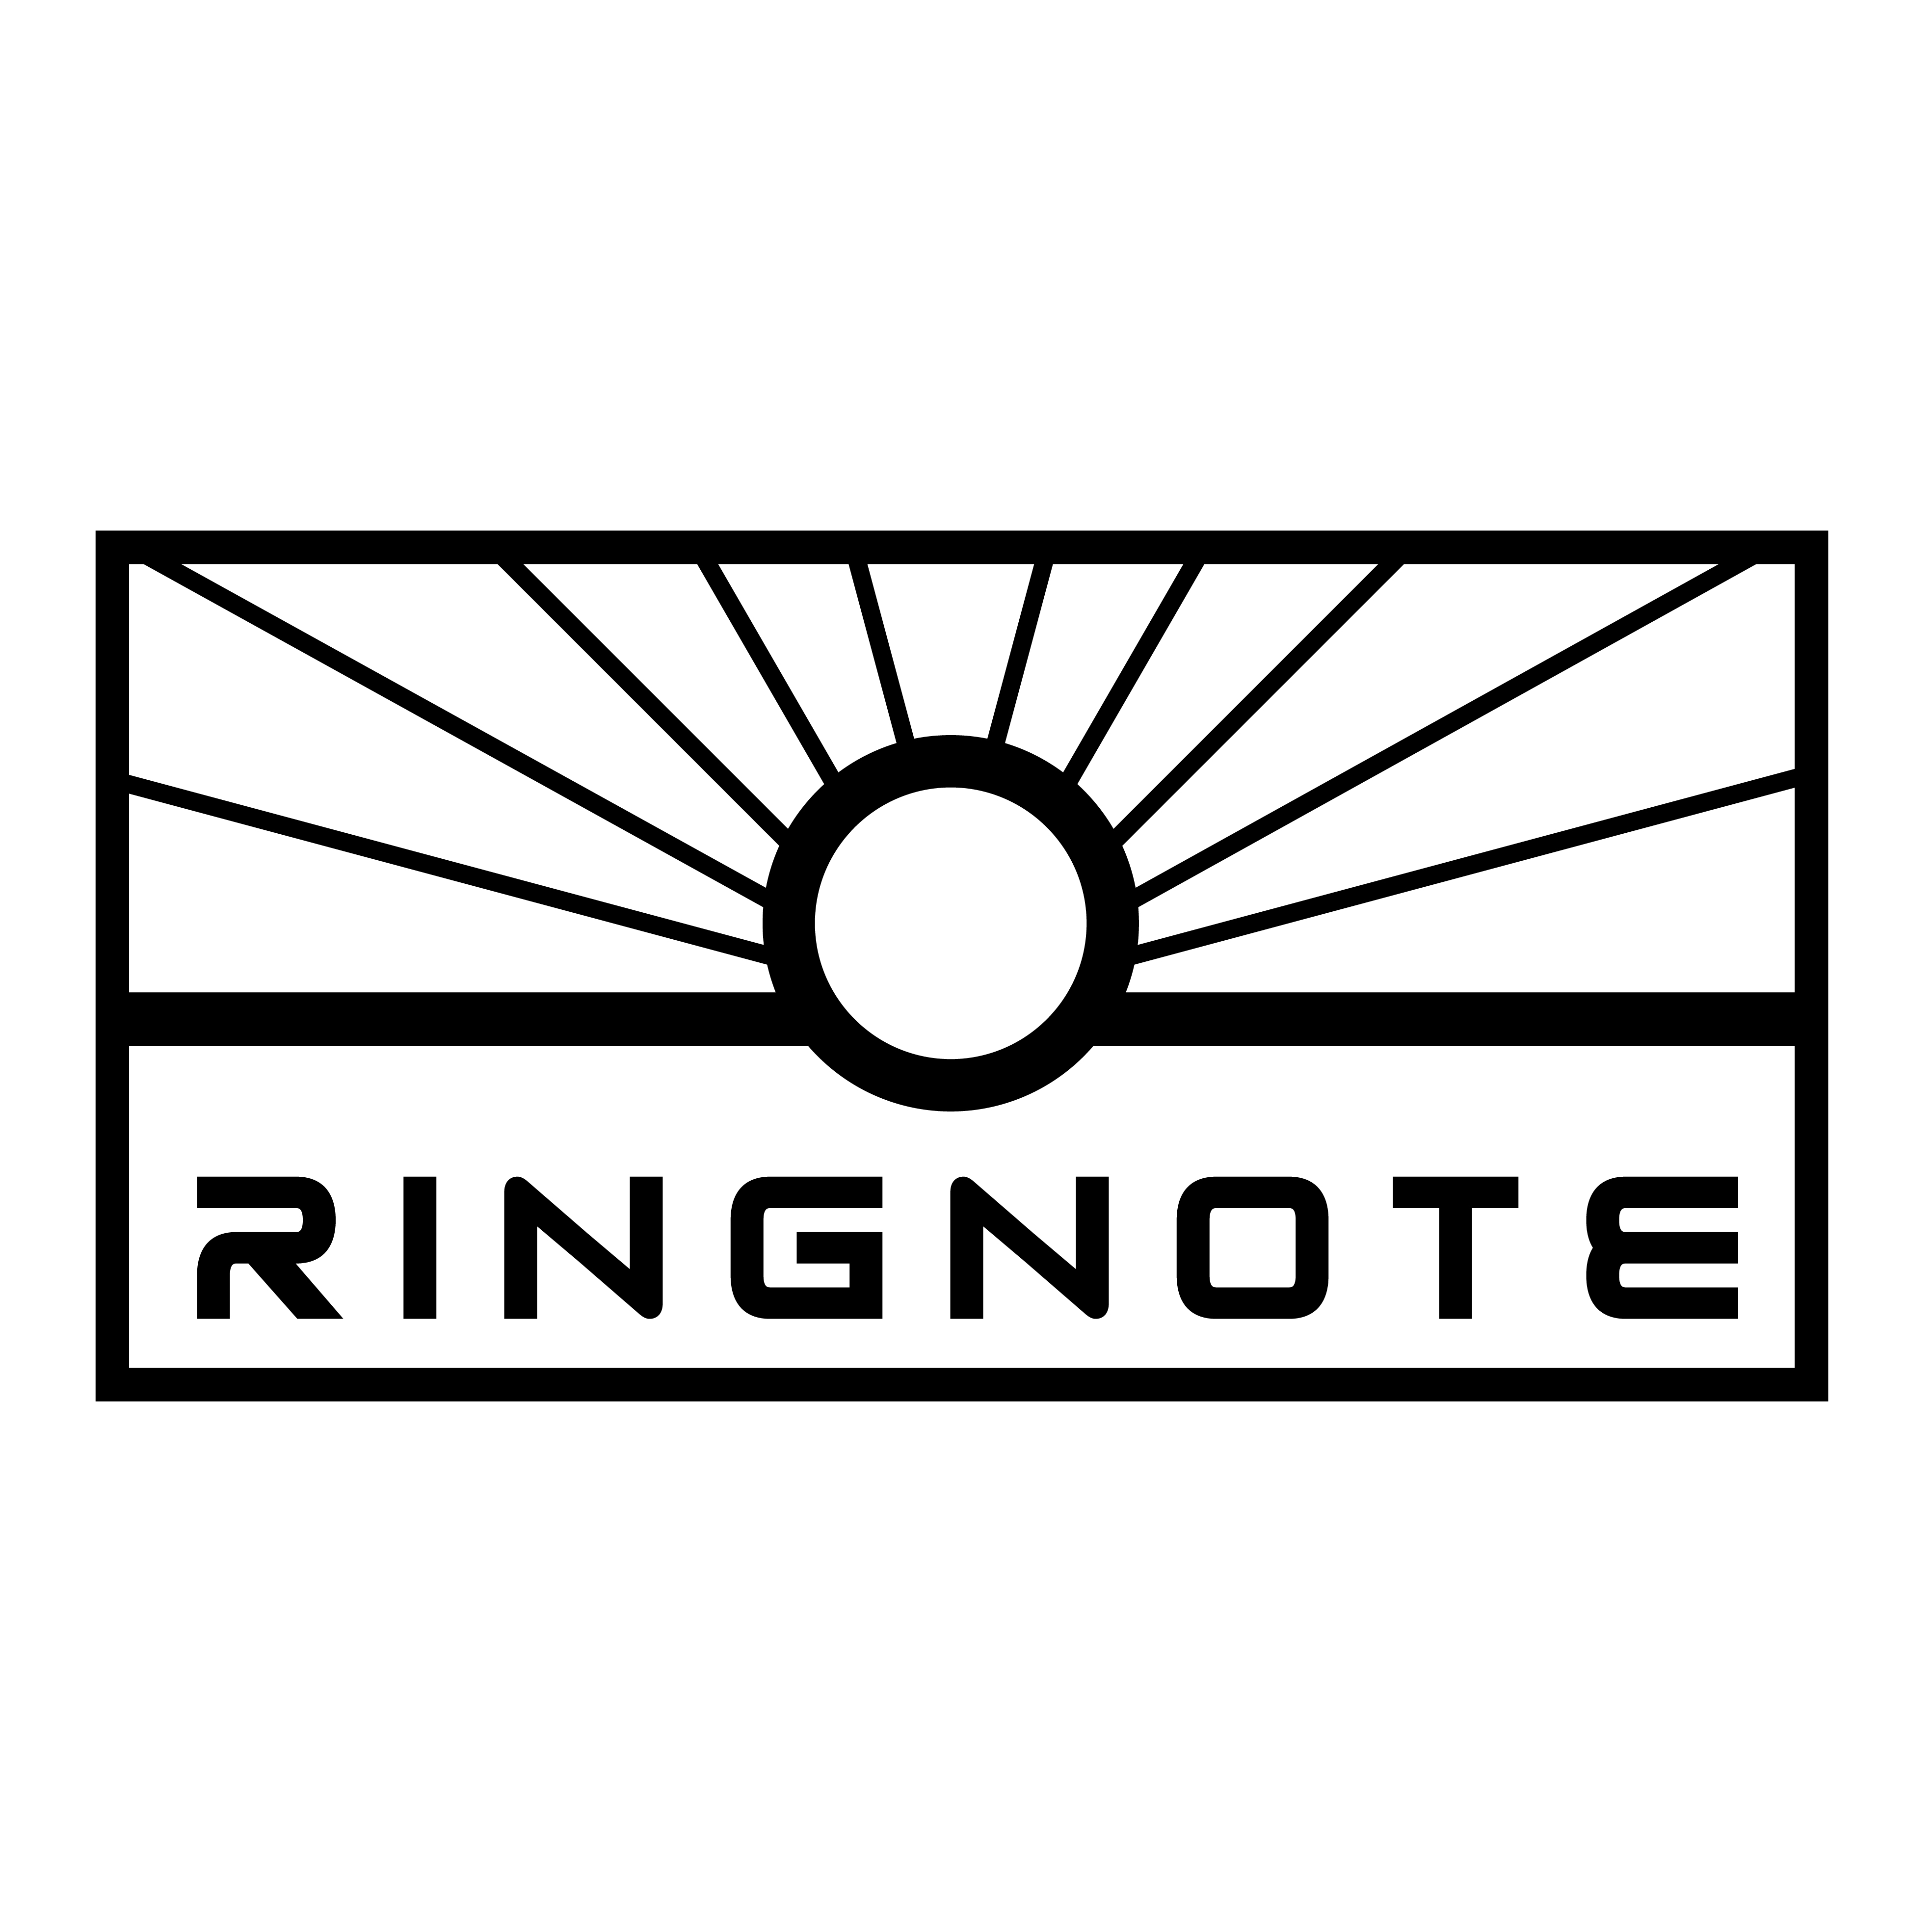 RINGNOTE